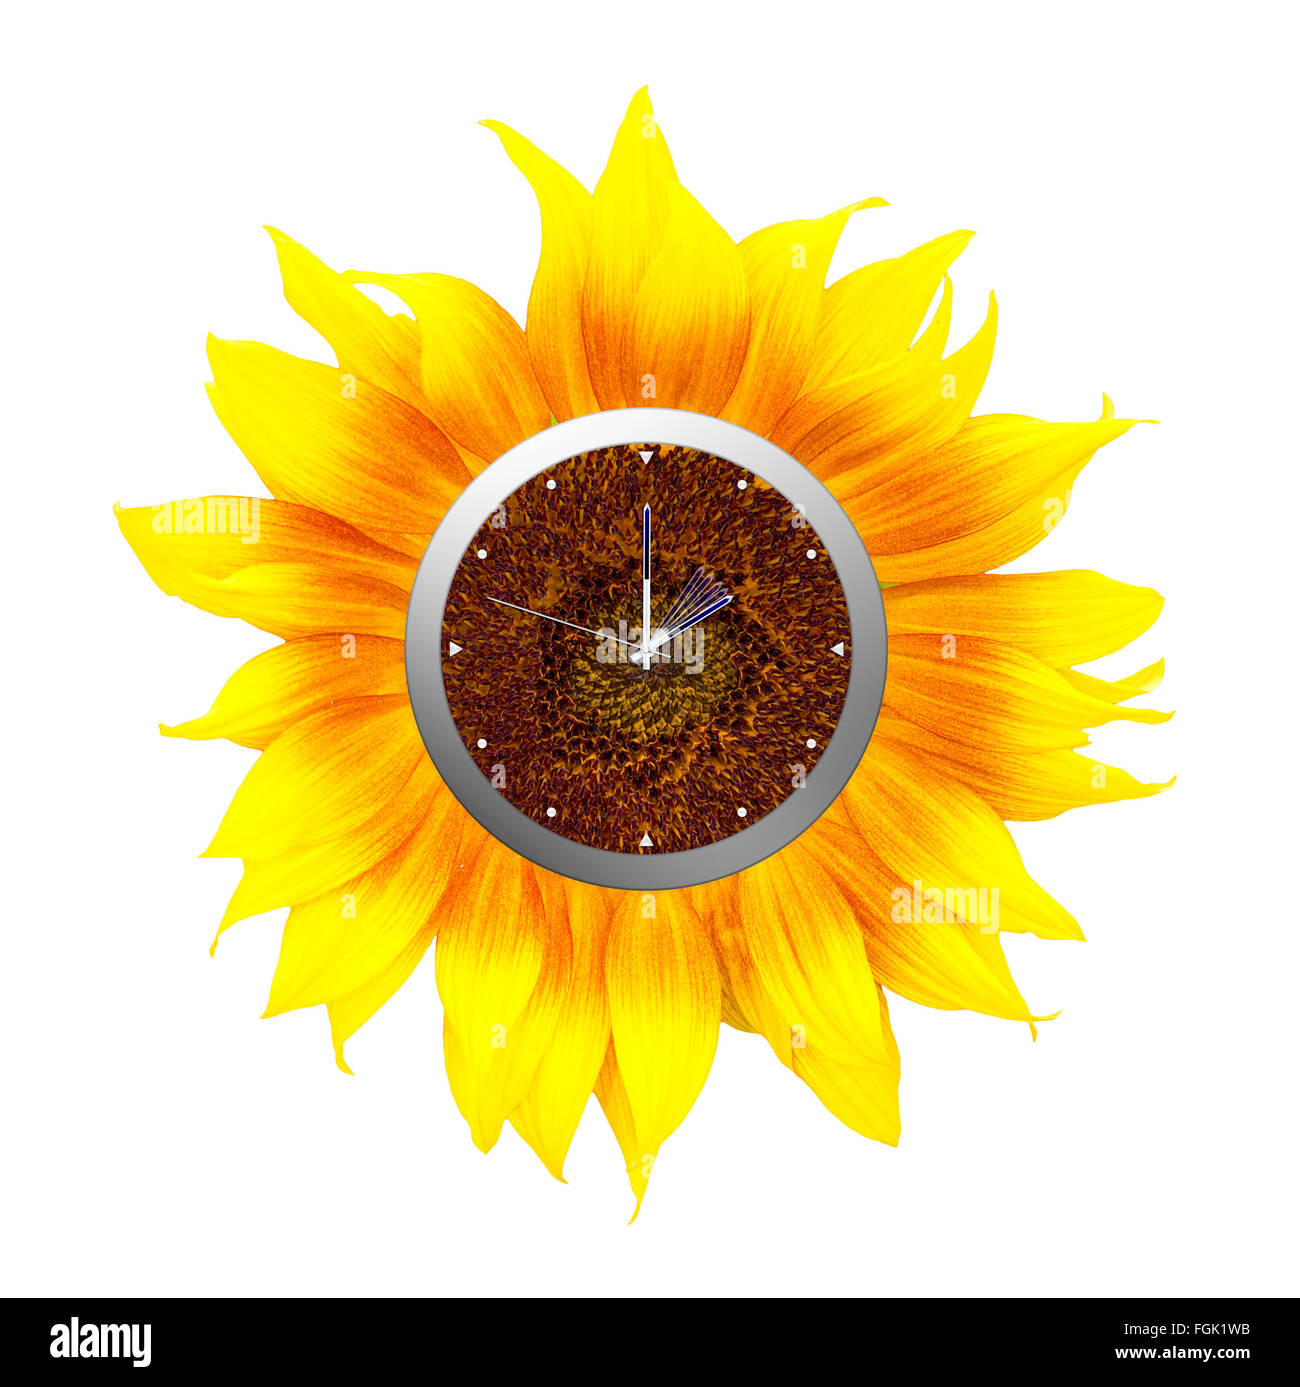 Sunflower clock. Summer time starts, isolated on white. Stock Photo